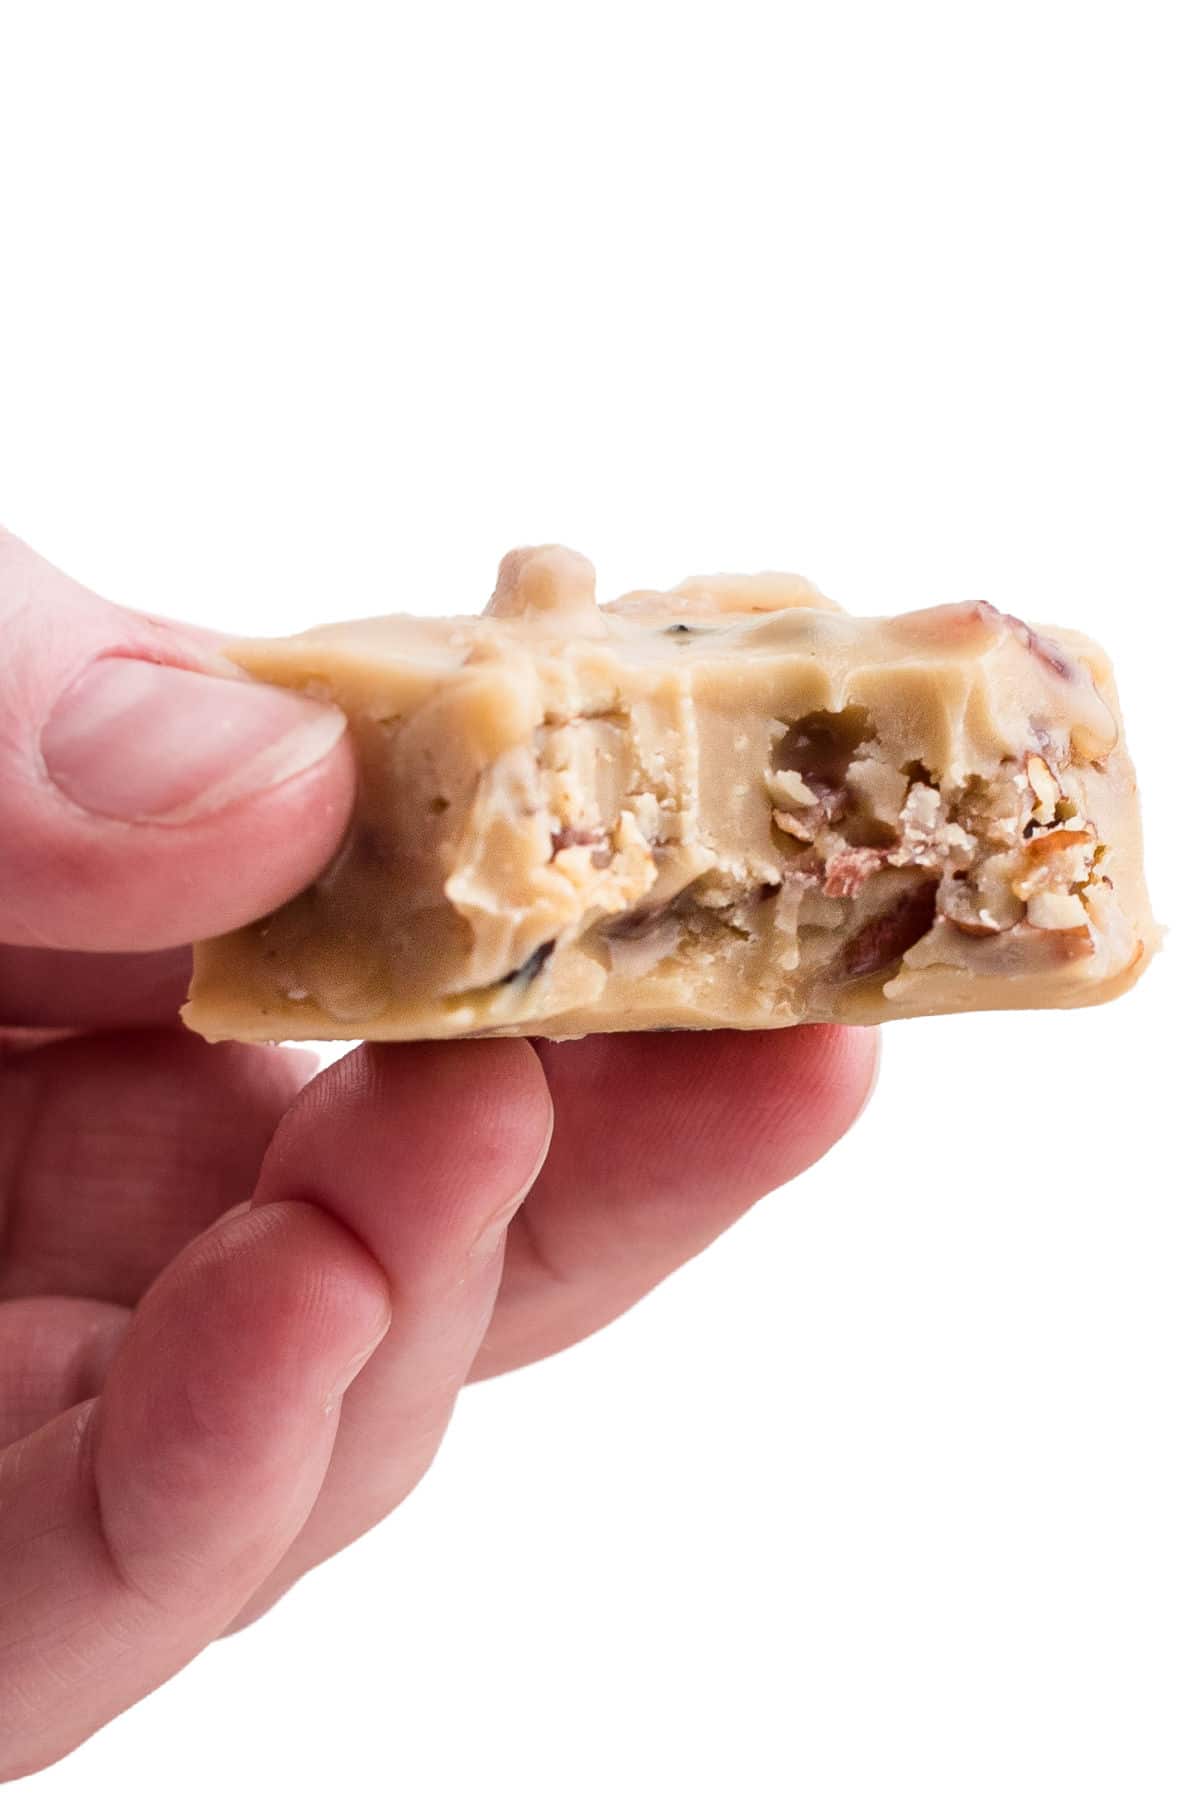 a hand holding a piece of maple bacon fudge with a bite taken out